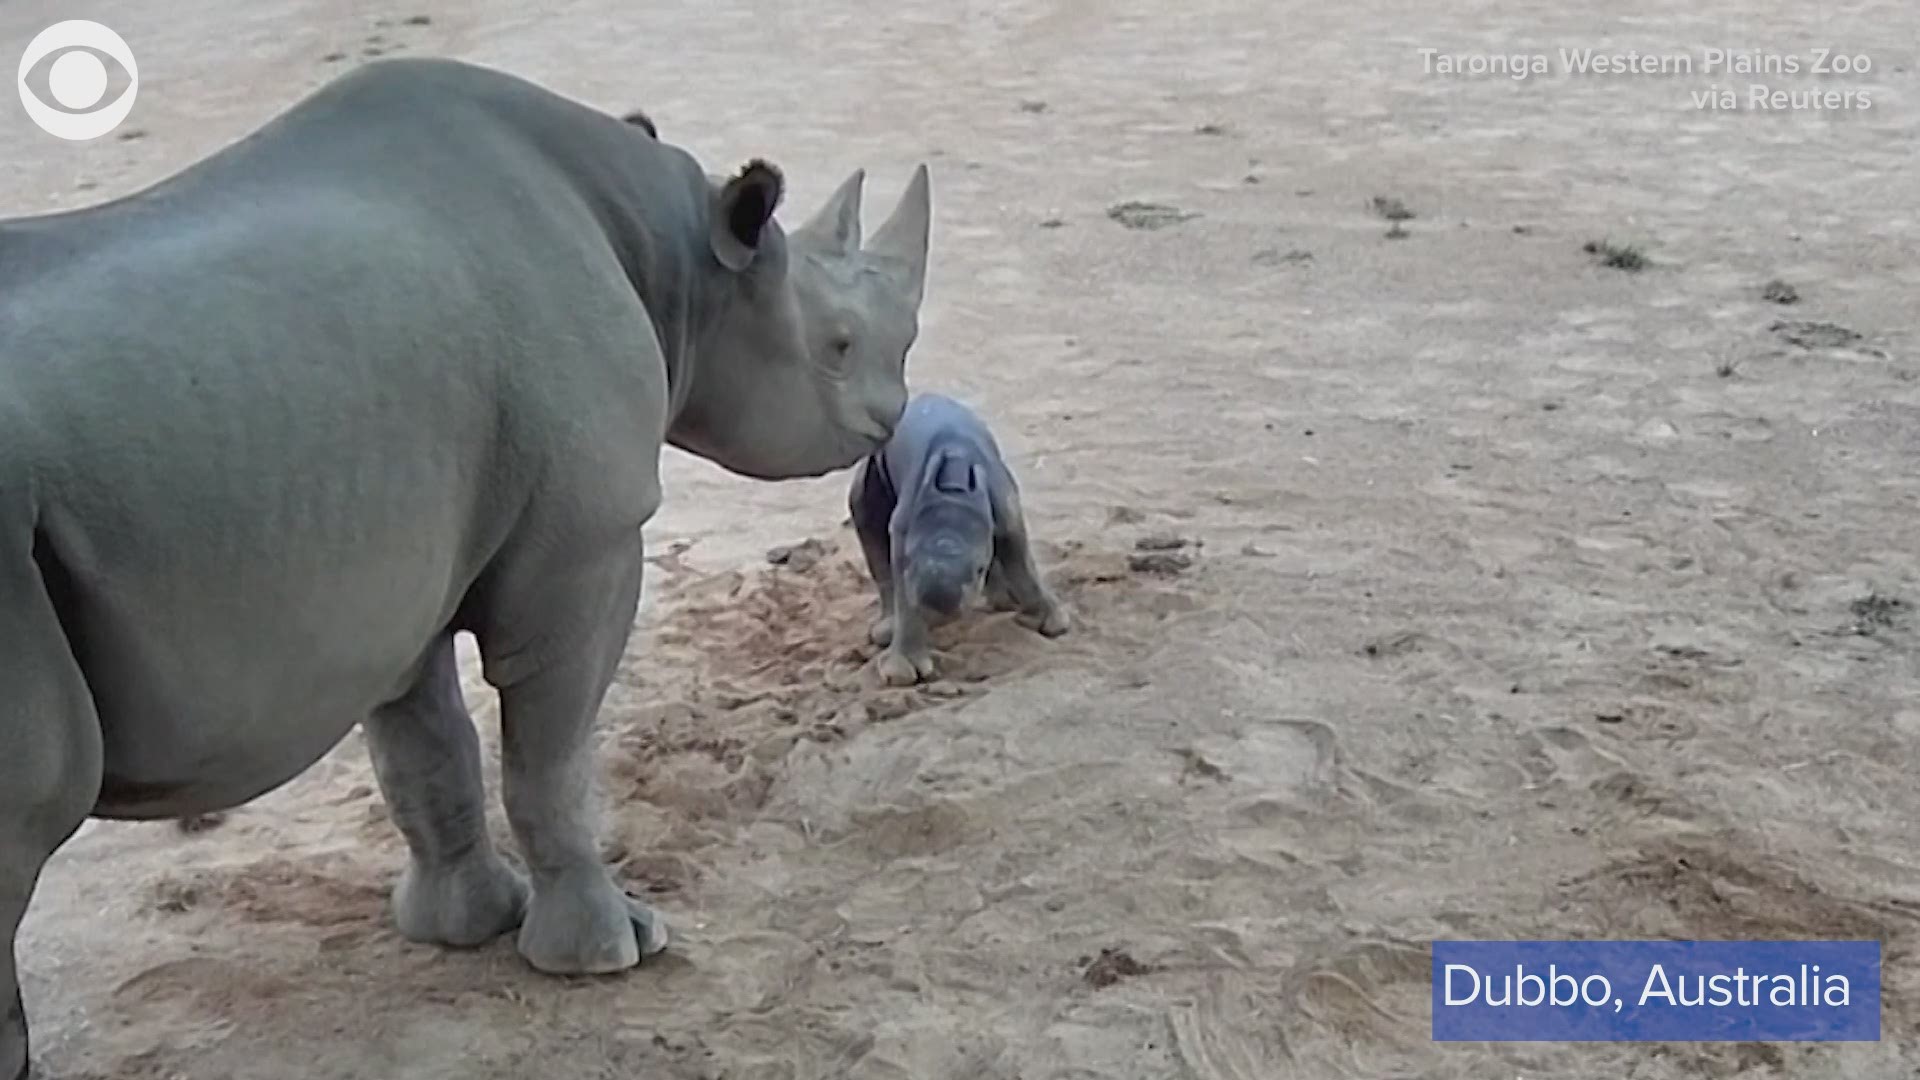 AW! Check out this newborn black rhino taking her first steps at the Taronga Western Plains Zoo in Dubbo, Australia on February 24.